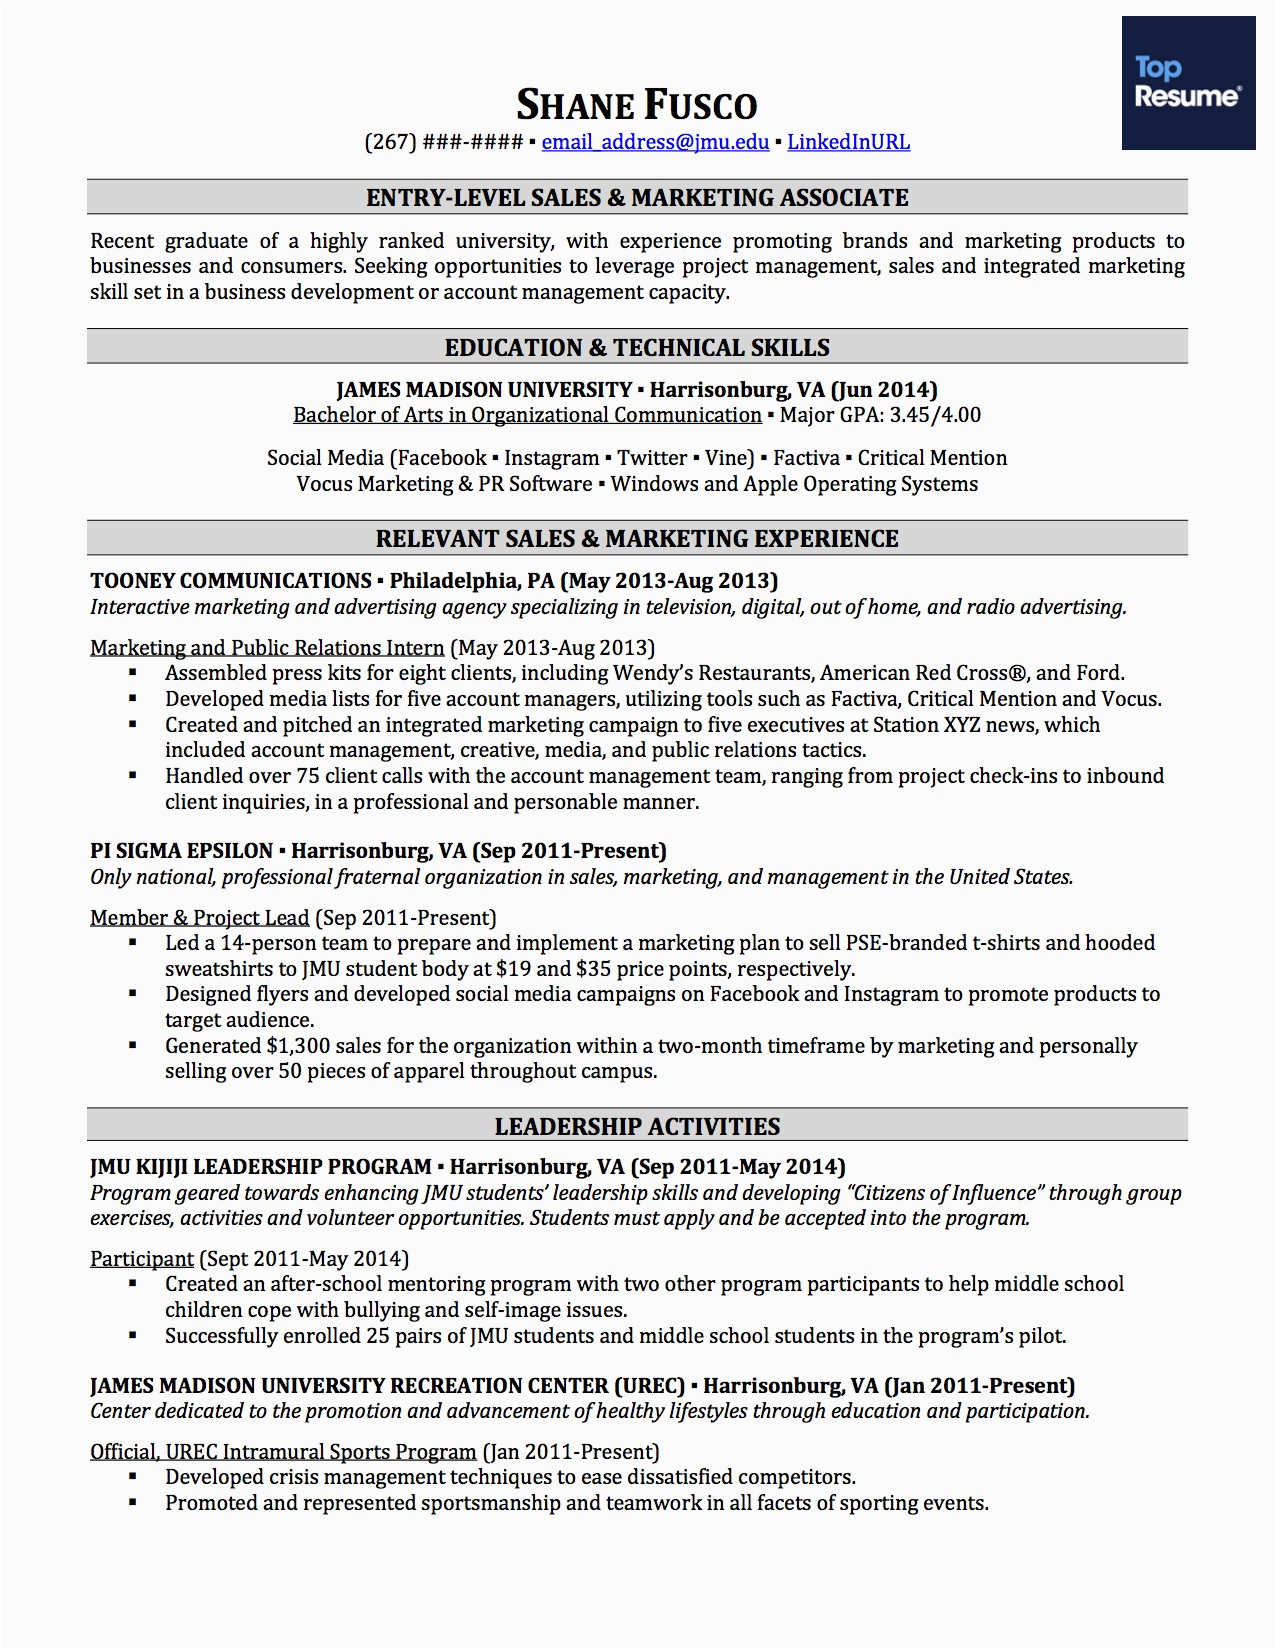 Writing A Resume with No Work Experience Sample How to Write A Resume with No Job Experience